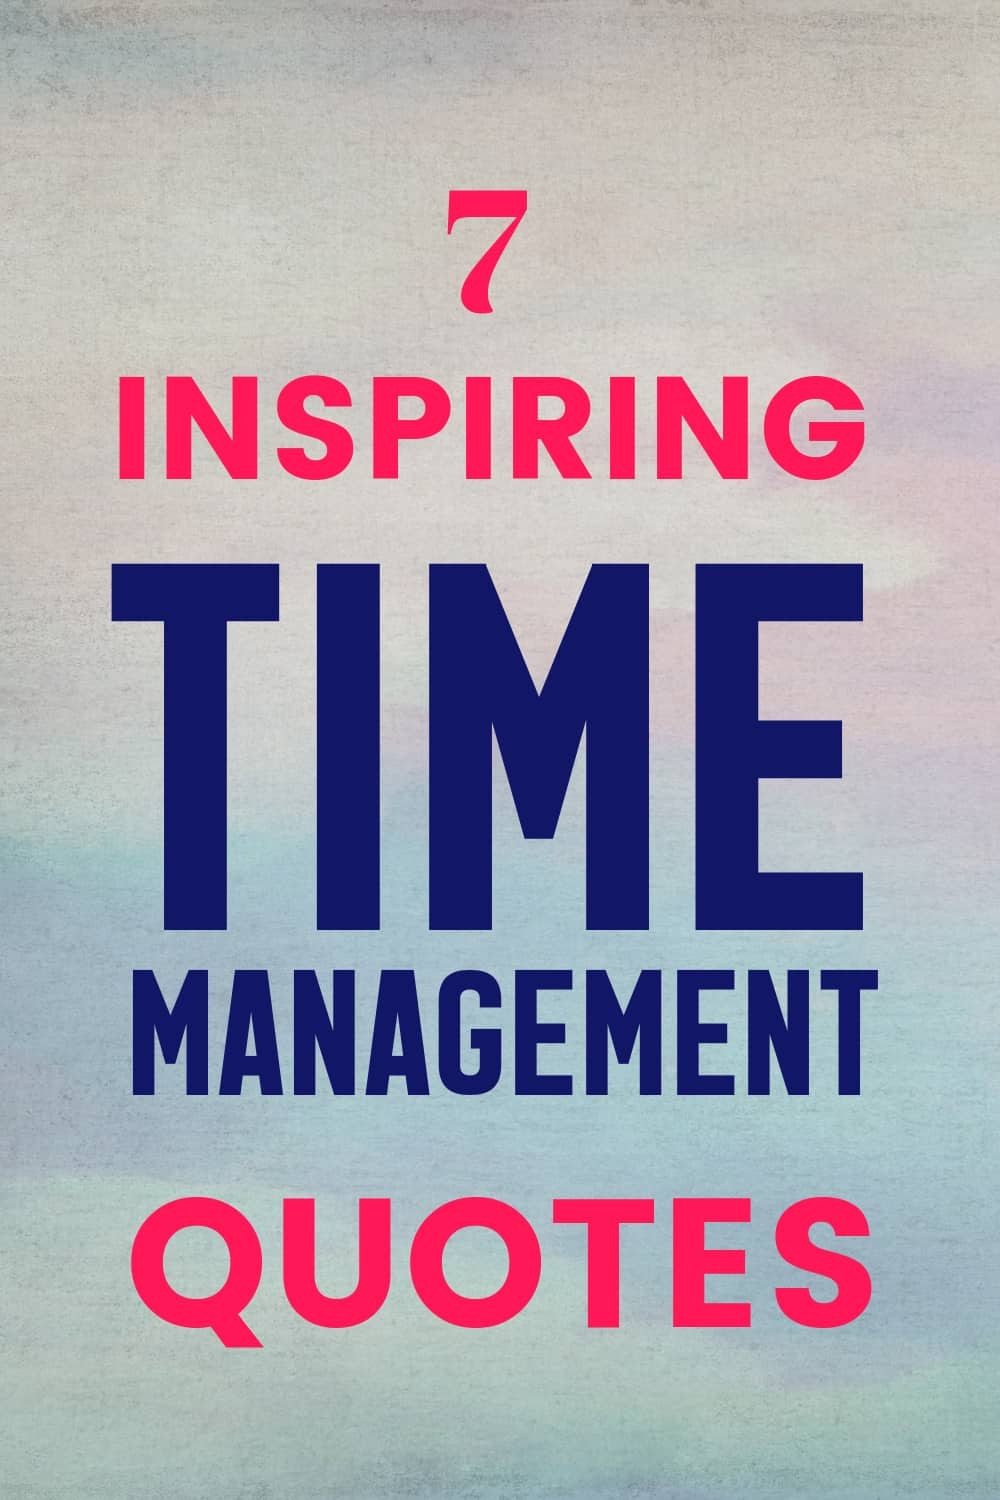 Inspirational quotes about time management. From Brian Tracy to Tim Robbins. Quotes to inspire you. #inspiration #motivation #relationship #timemanagement #quotes #lifelessons #successfulpeople  ♡ cheerfulcook.com via @cheerfulcook